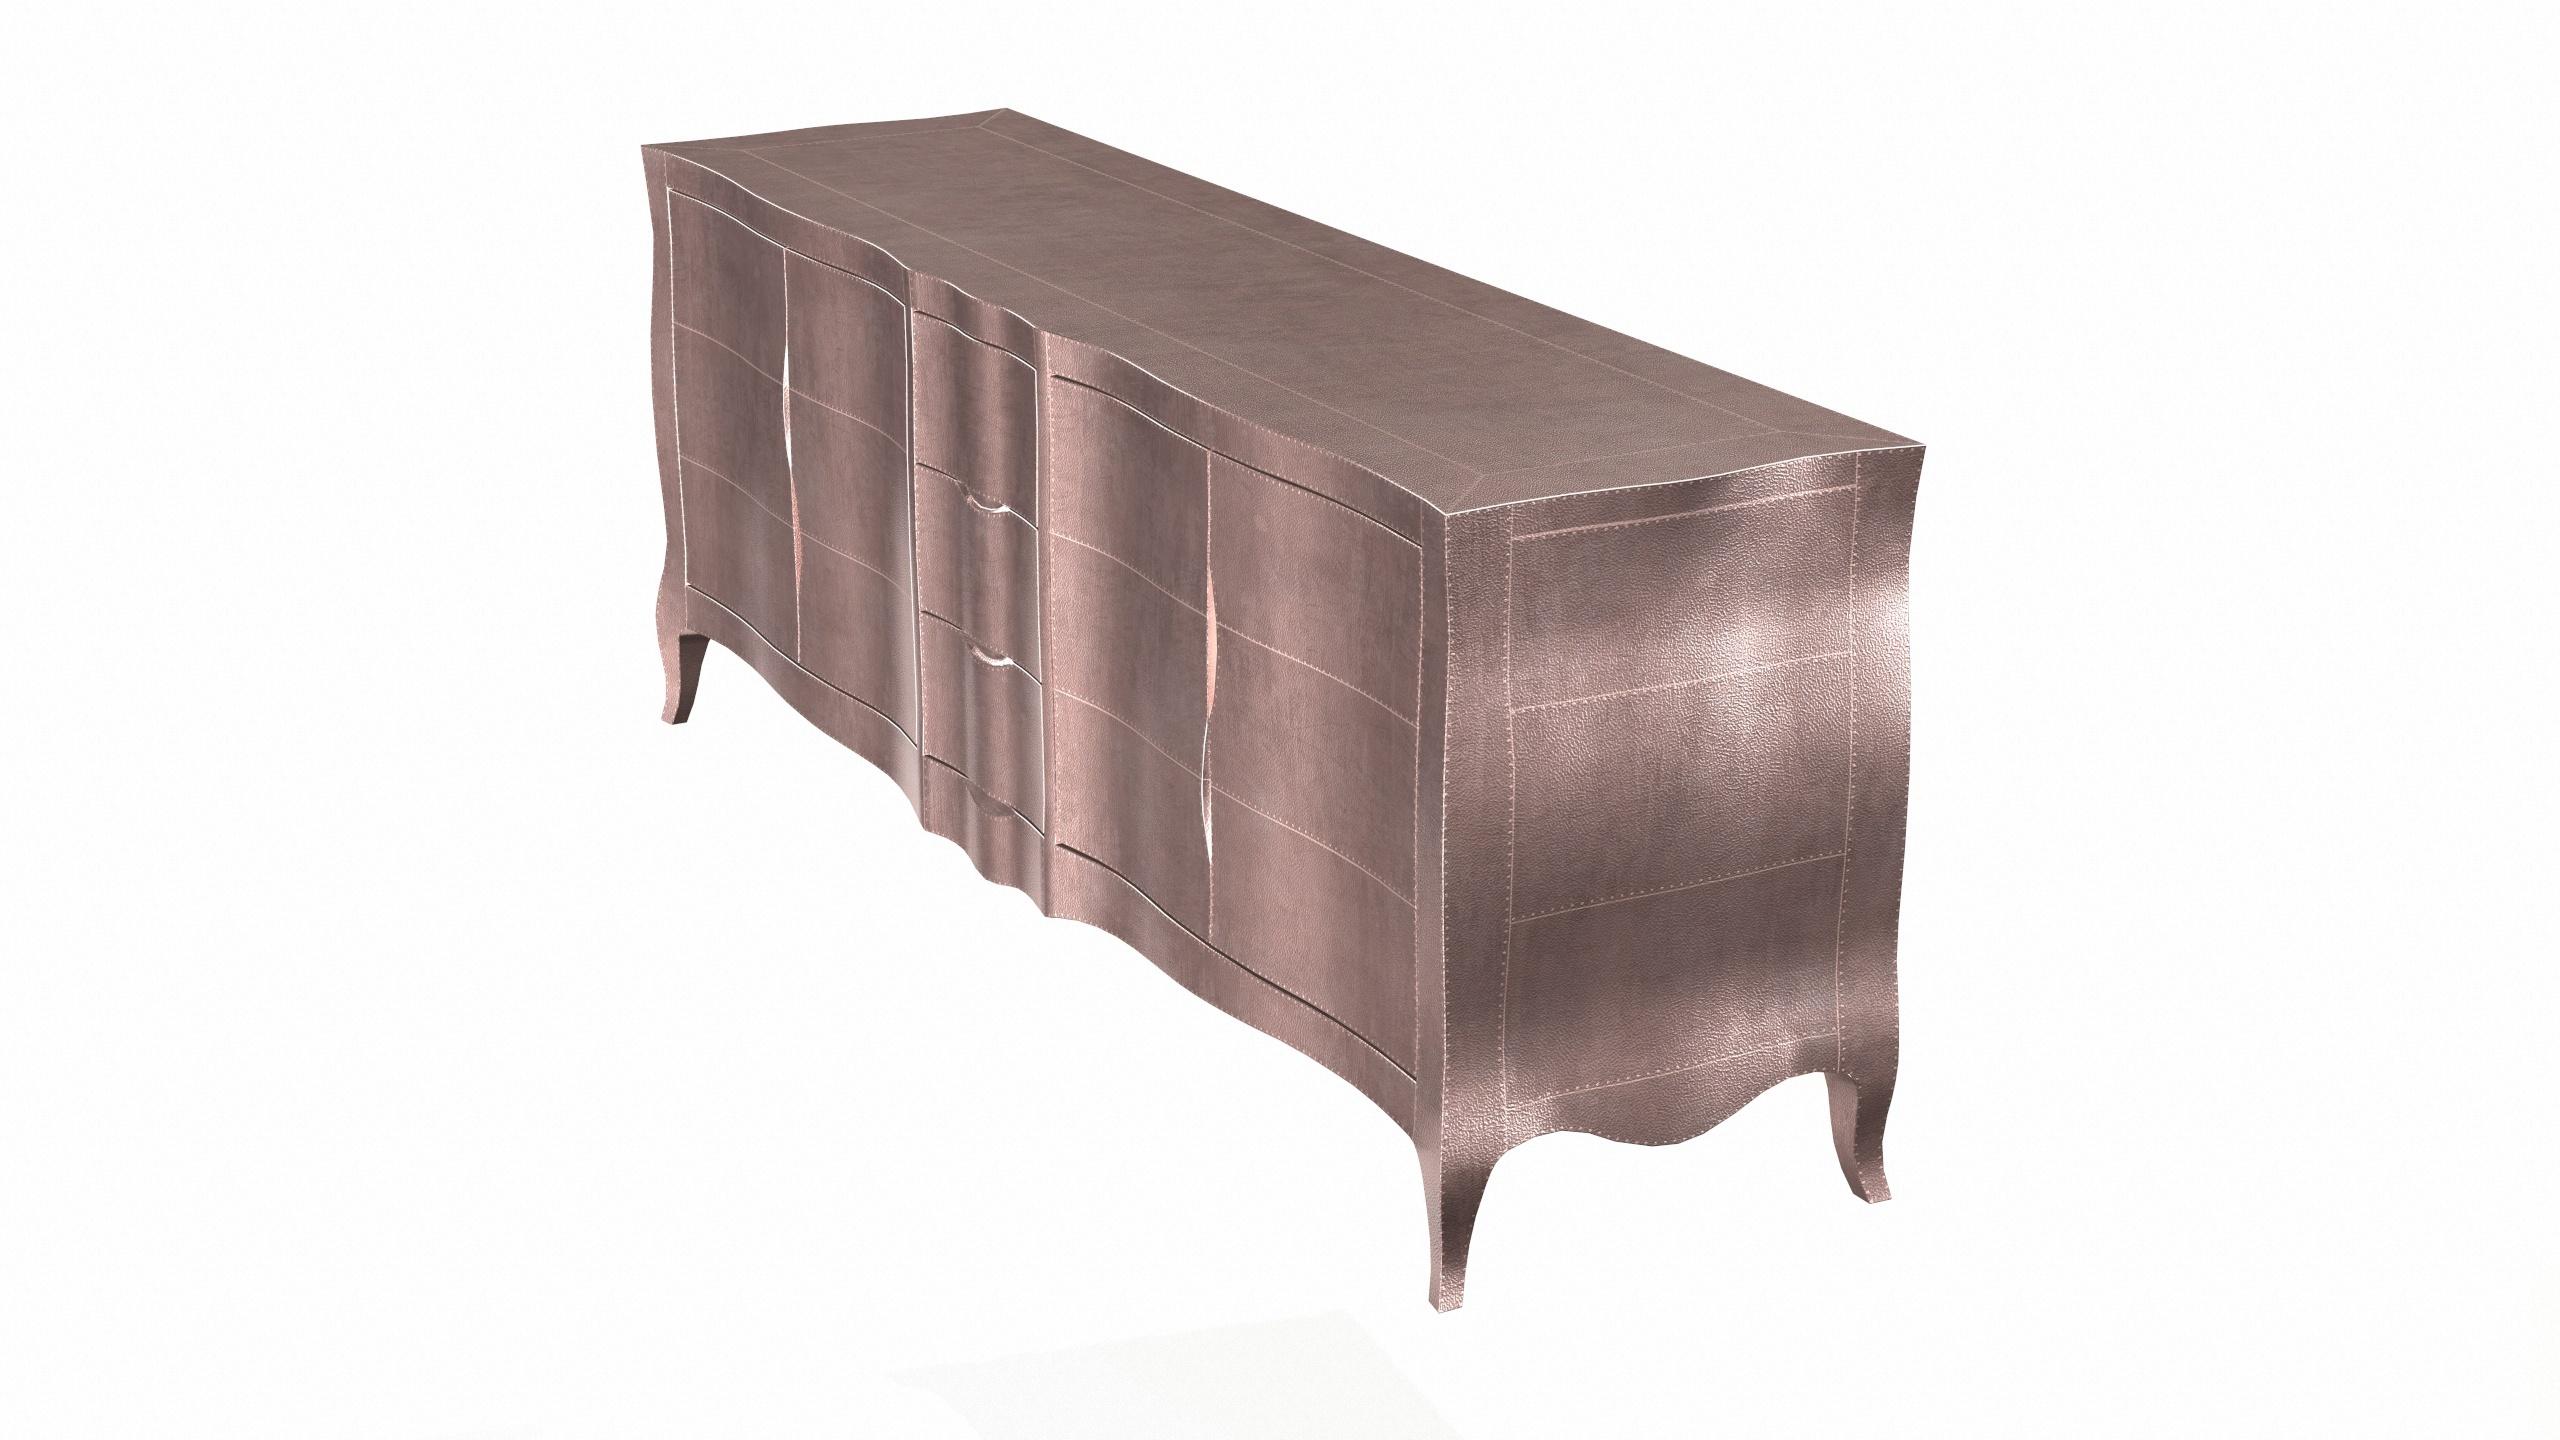 Hand-Carved Louise Credenza Art Deco Bookcases in Fine Hammered Copper by Paul Mathieu For Sale